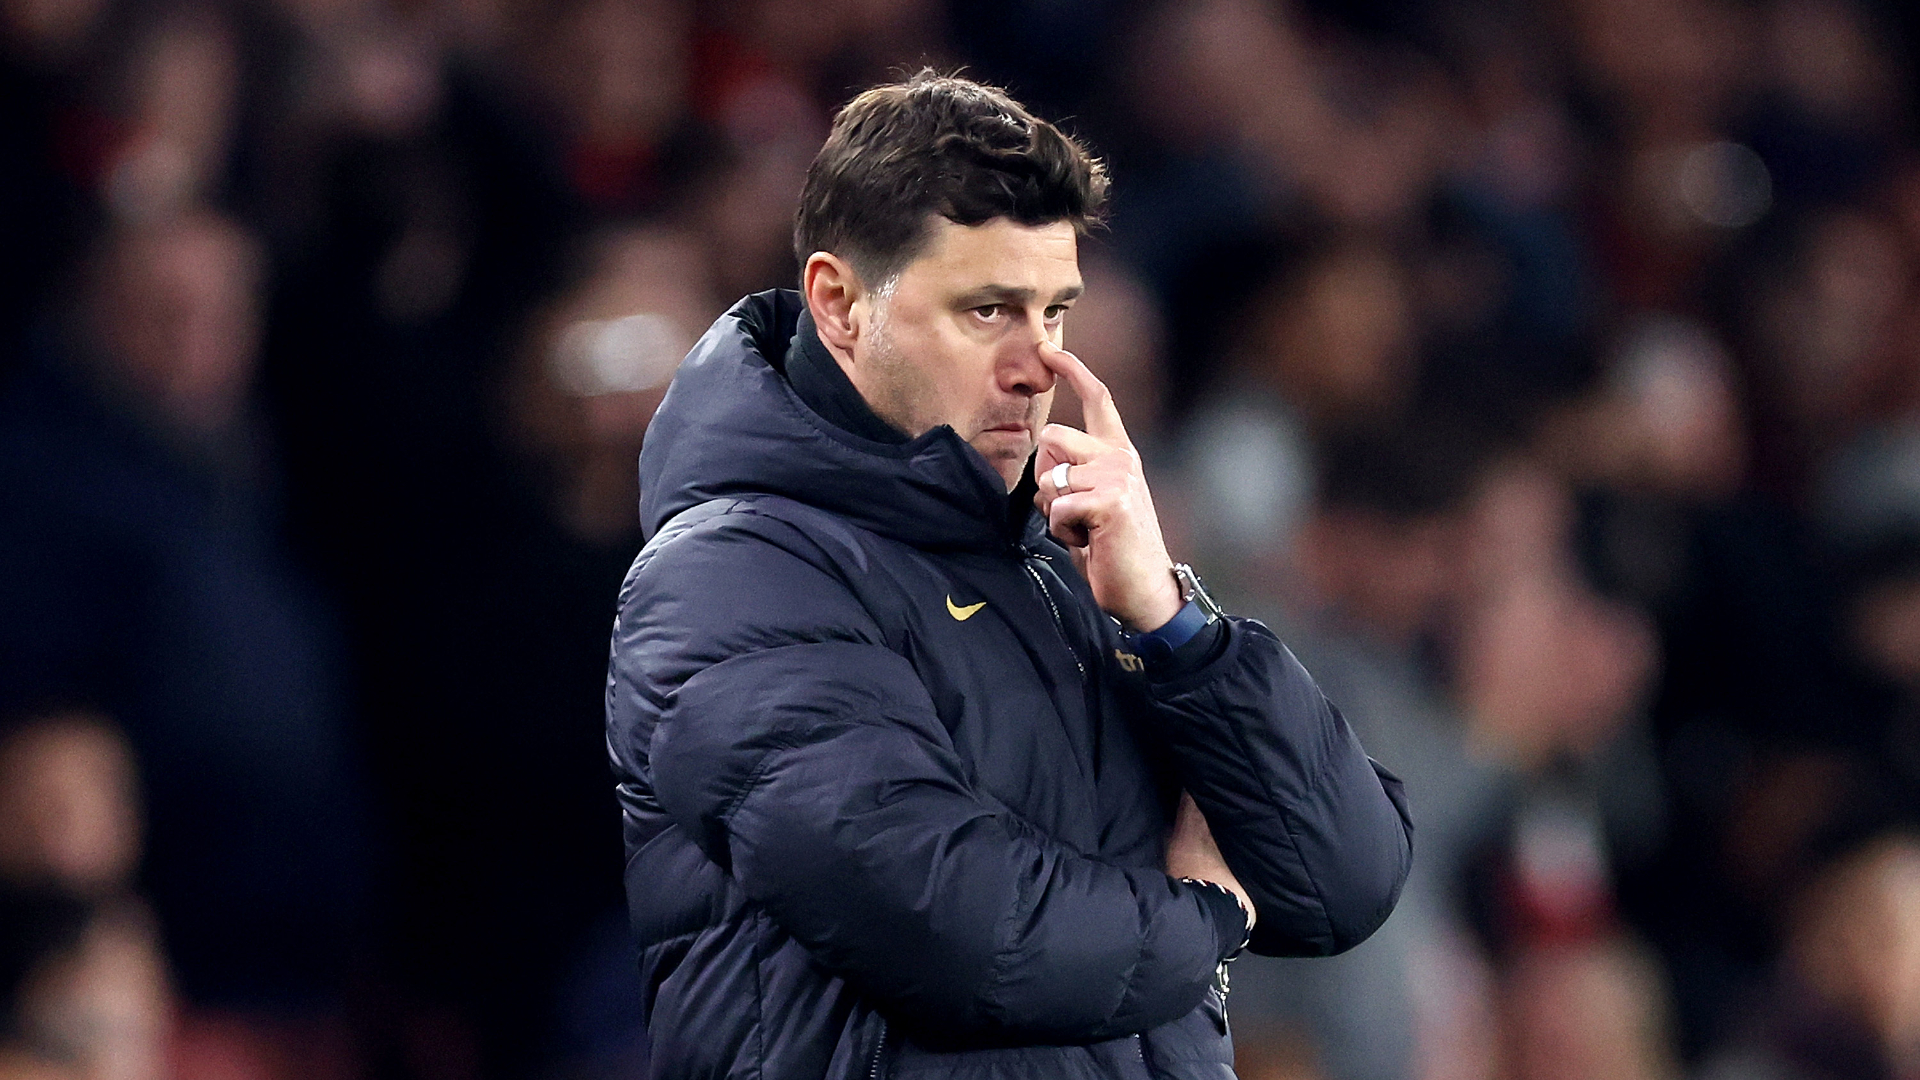 Poch fights back on Chelsea rumours